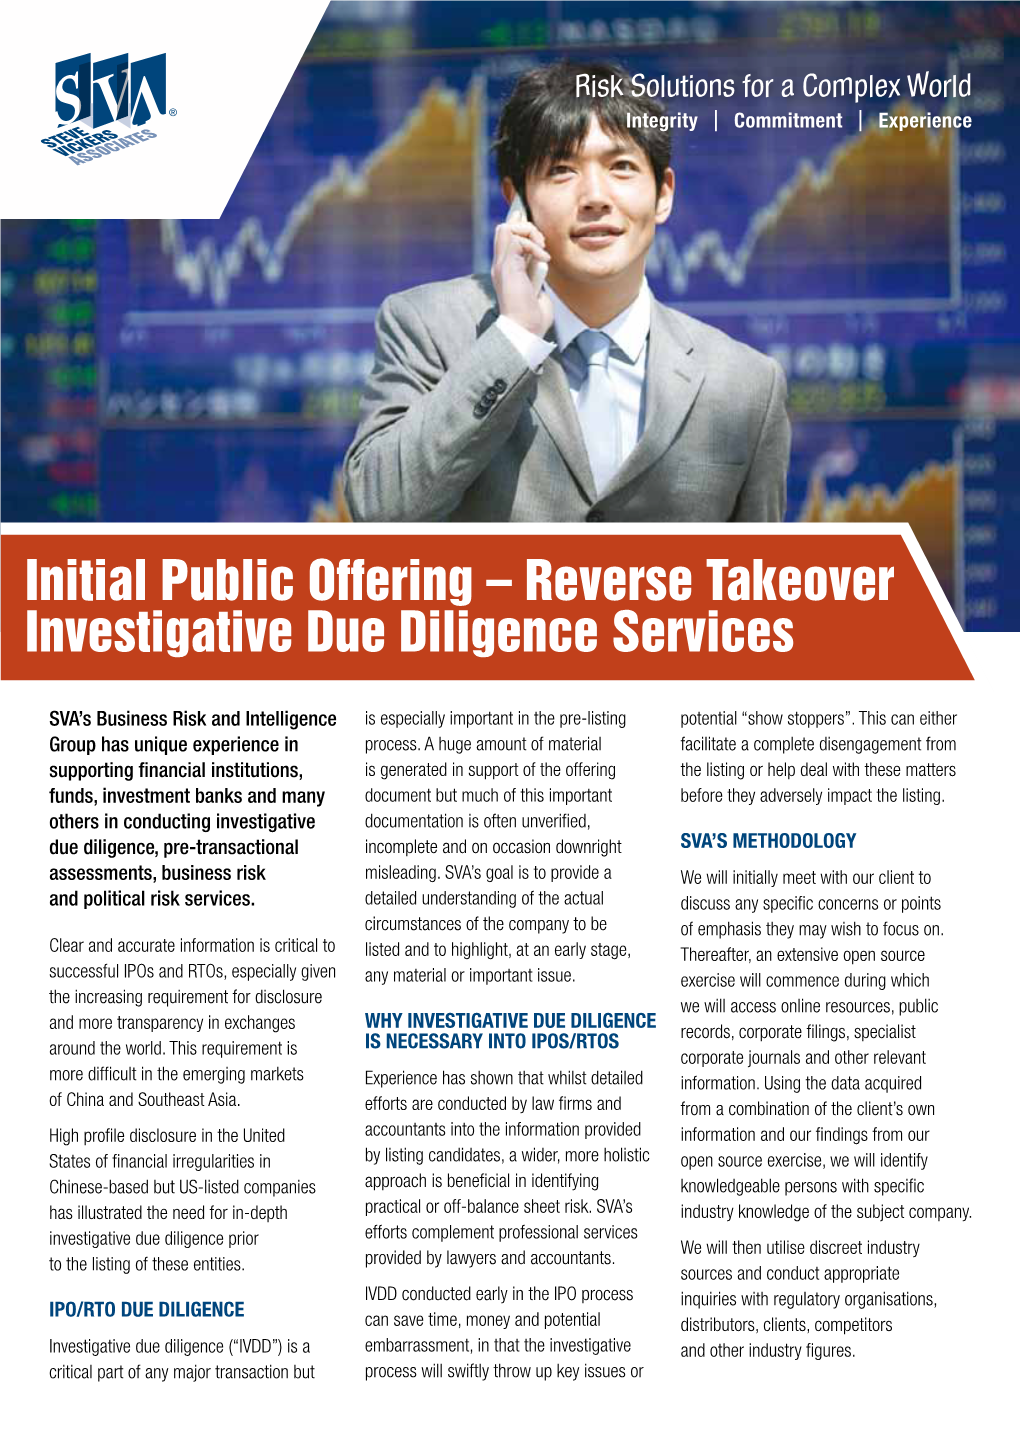 Reverse Takeover Investigative Due Diligence Services